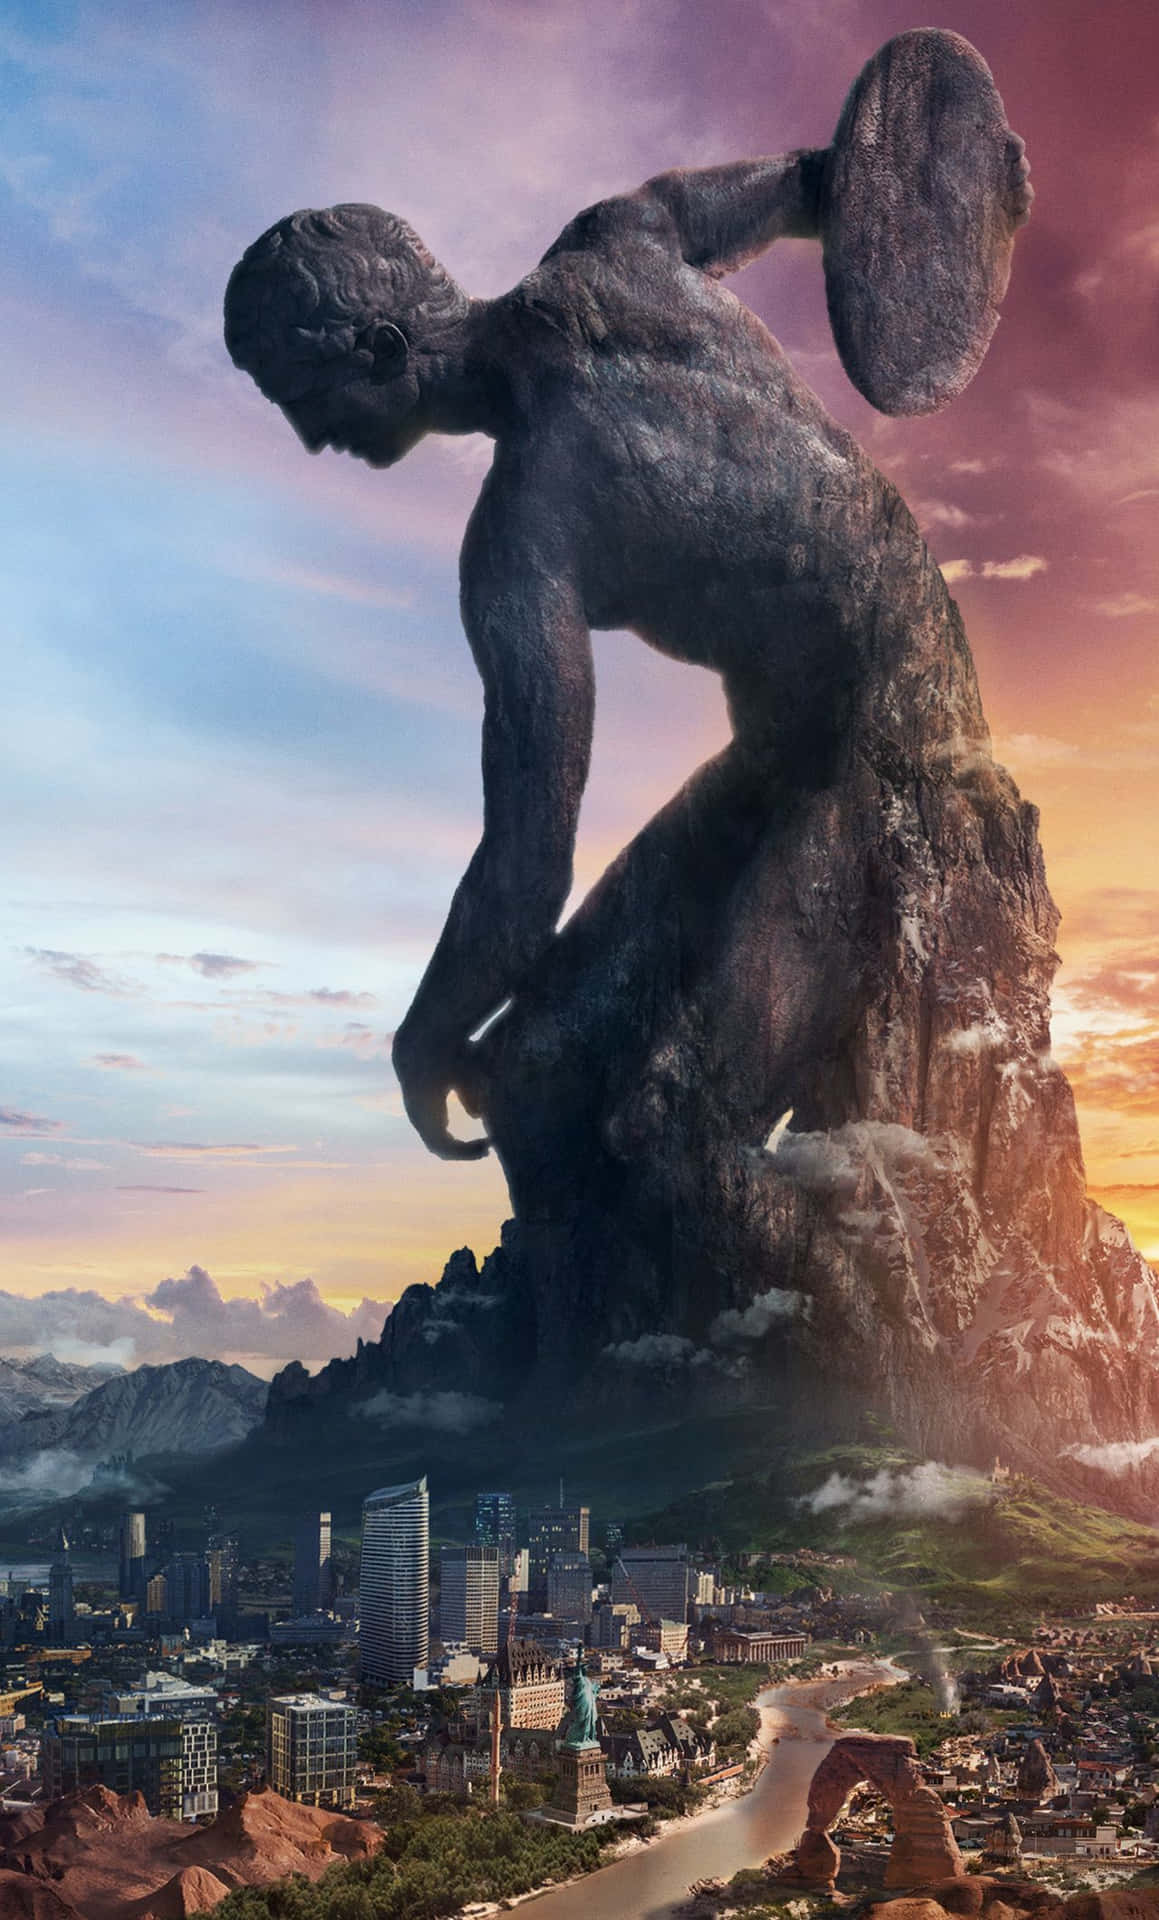 A Statue Of A Man On Top Of A Mountain